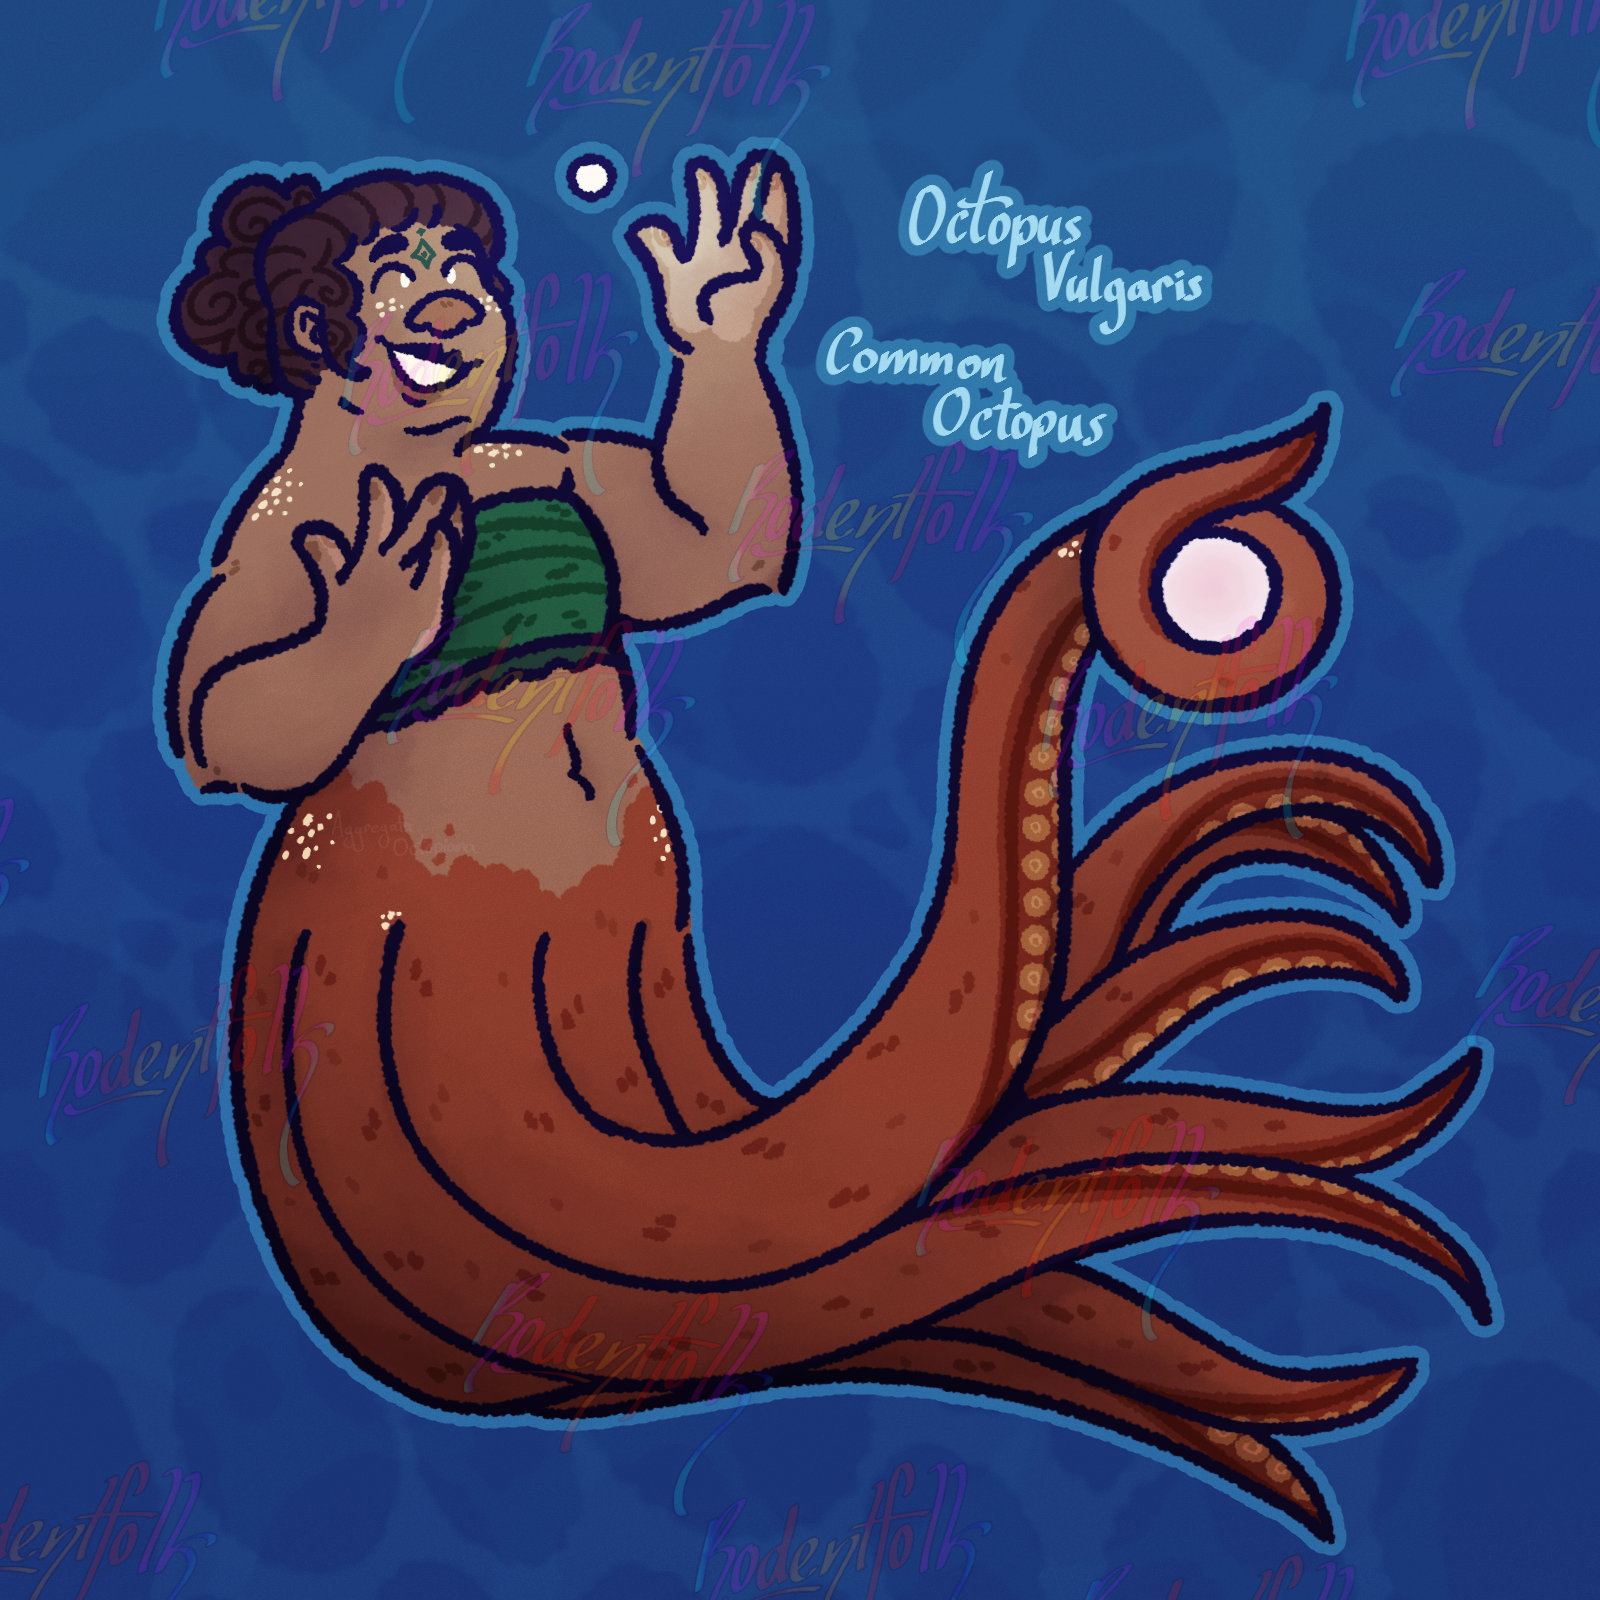 It is a MerMay themed drawing of Nik's OC, Tamaiti, as a mermaid. They've been drawn with the lower-half of an orange octopus (Text next to them notes that they have been drawn as a Common Octopus (Octopus vulagirs) and are covered in white spots). They are wearing a crop-top style shirt made out of seaweed with a ruffled trim at the end. One of their tentacles is wrapped around a white ball as they gleefully look up and try to grab a smaller ball floating above them. Faint text next to their hip says, 'Aggregata octopiana'